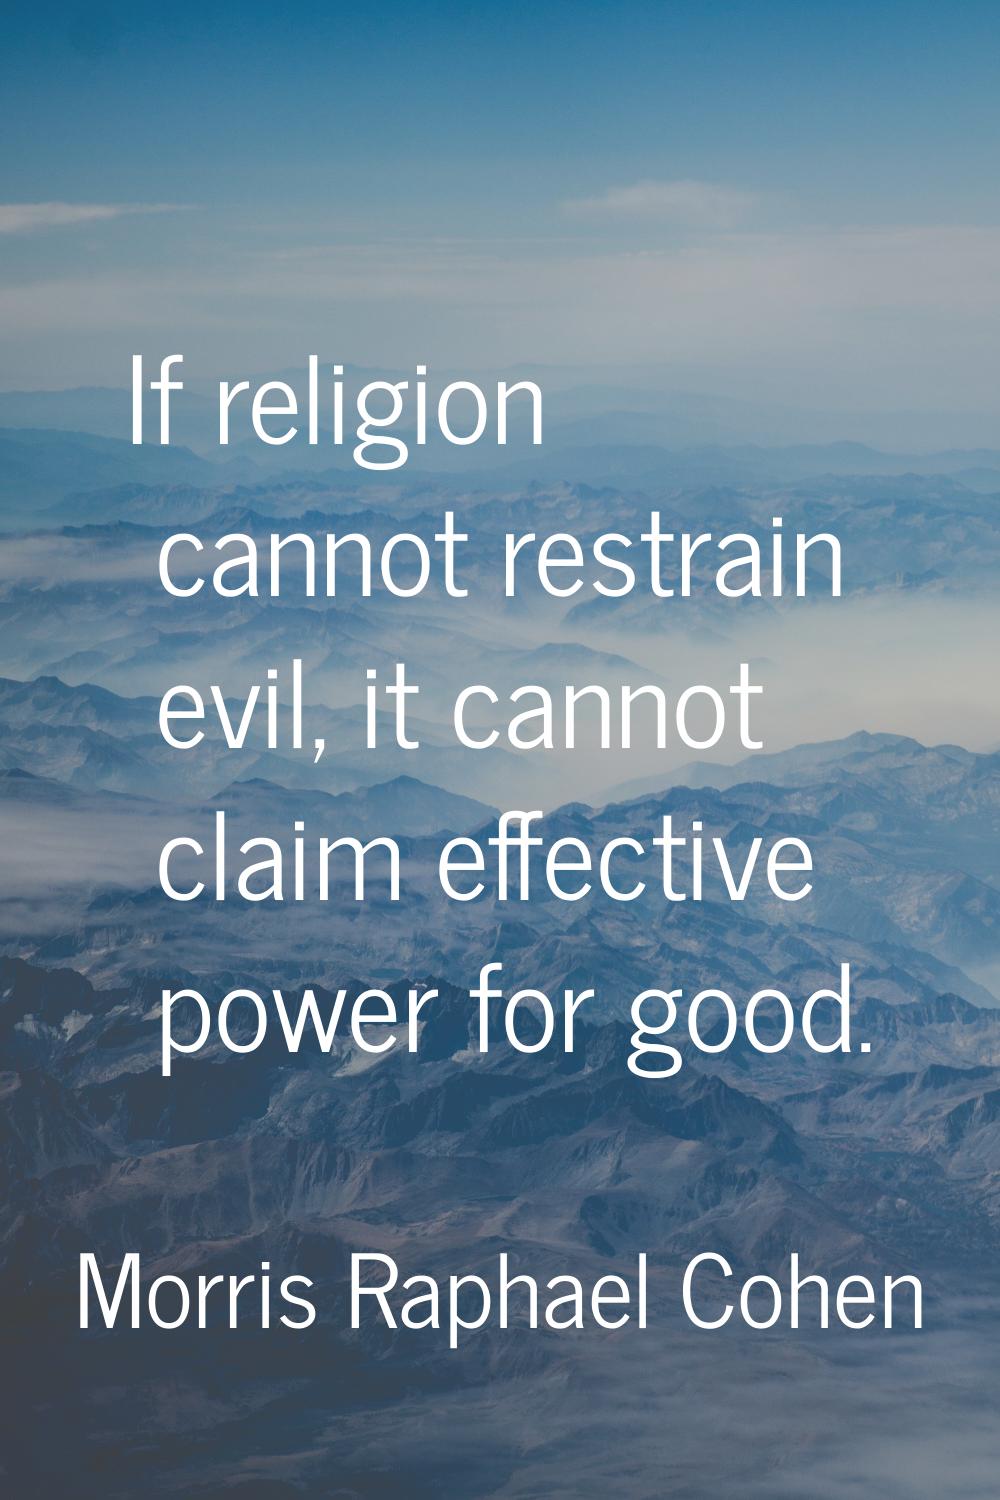 If religion cannot restrain evil, it cannot claim effective power for good.